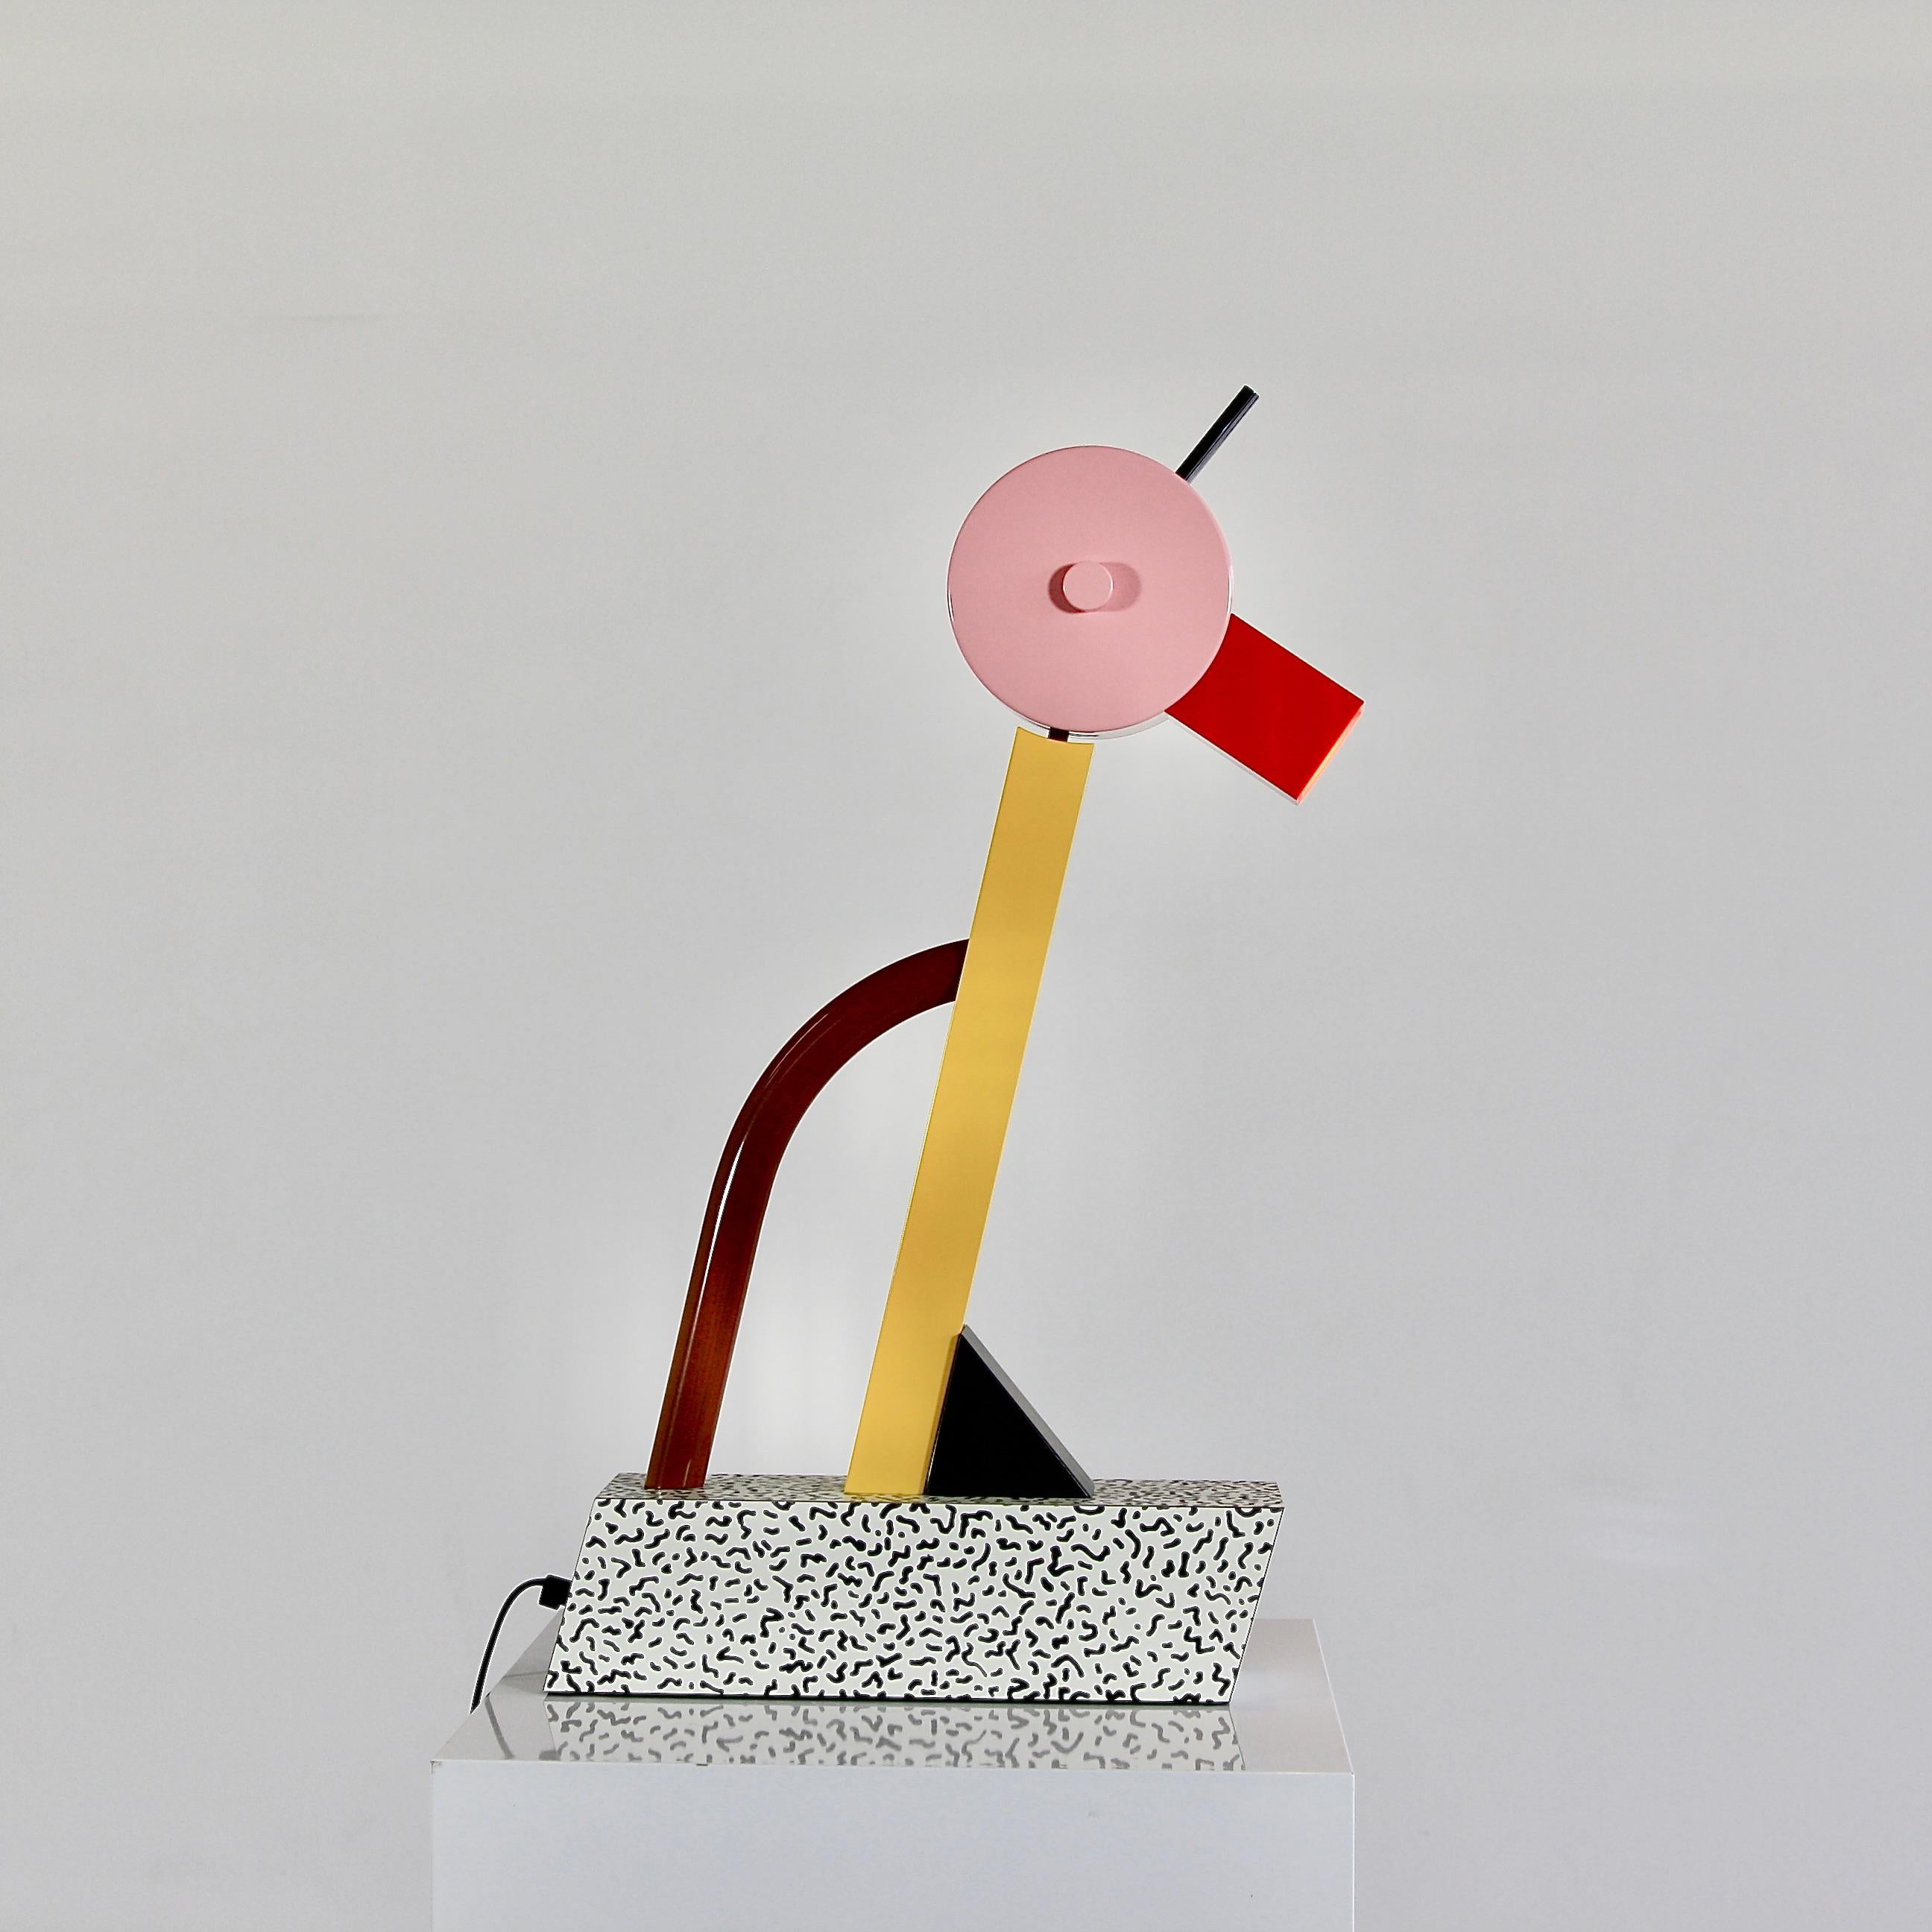 Metal construction, wooden base with laminate and head with halogen lamp, 'The Duck'. With original metal label.

Reference: Fiell. 1000 Lights. 1960 to present. P. 316, illustrated.

Ettore Sottsass (14 September 1917 – 31 December 2007). Italian